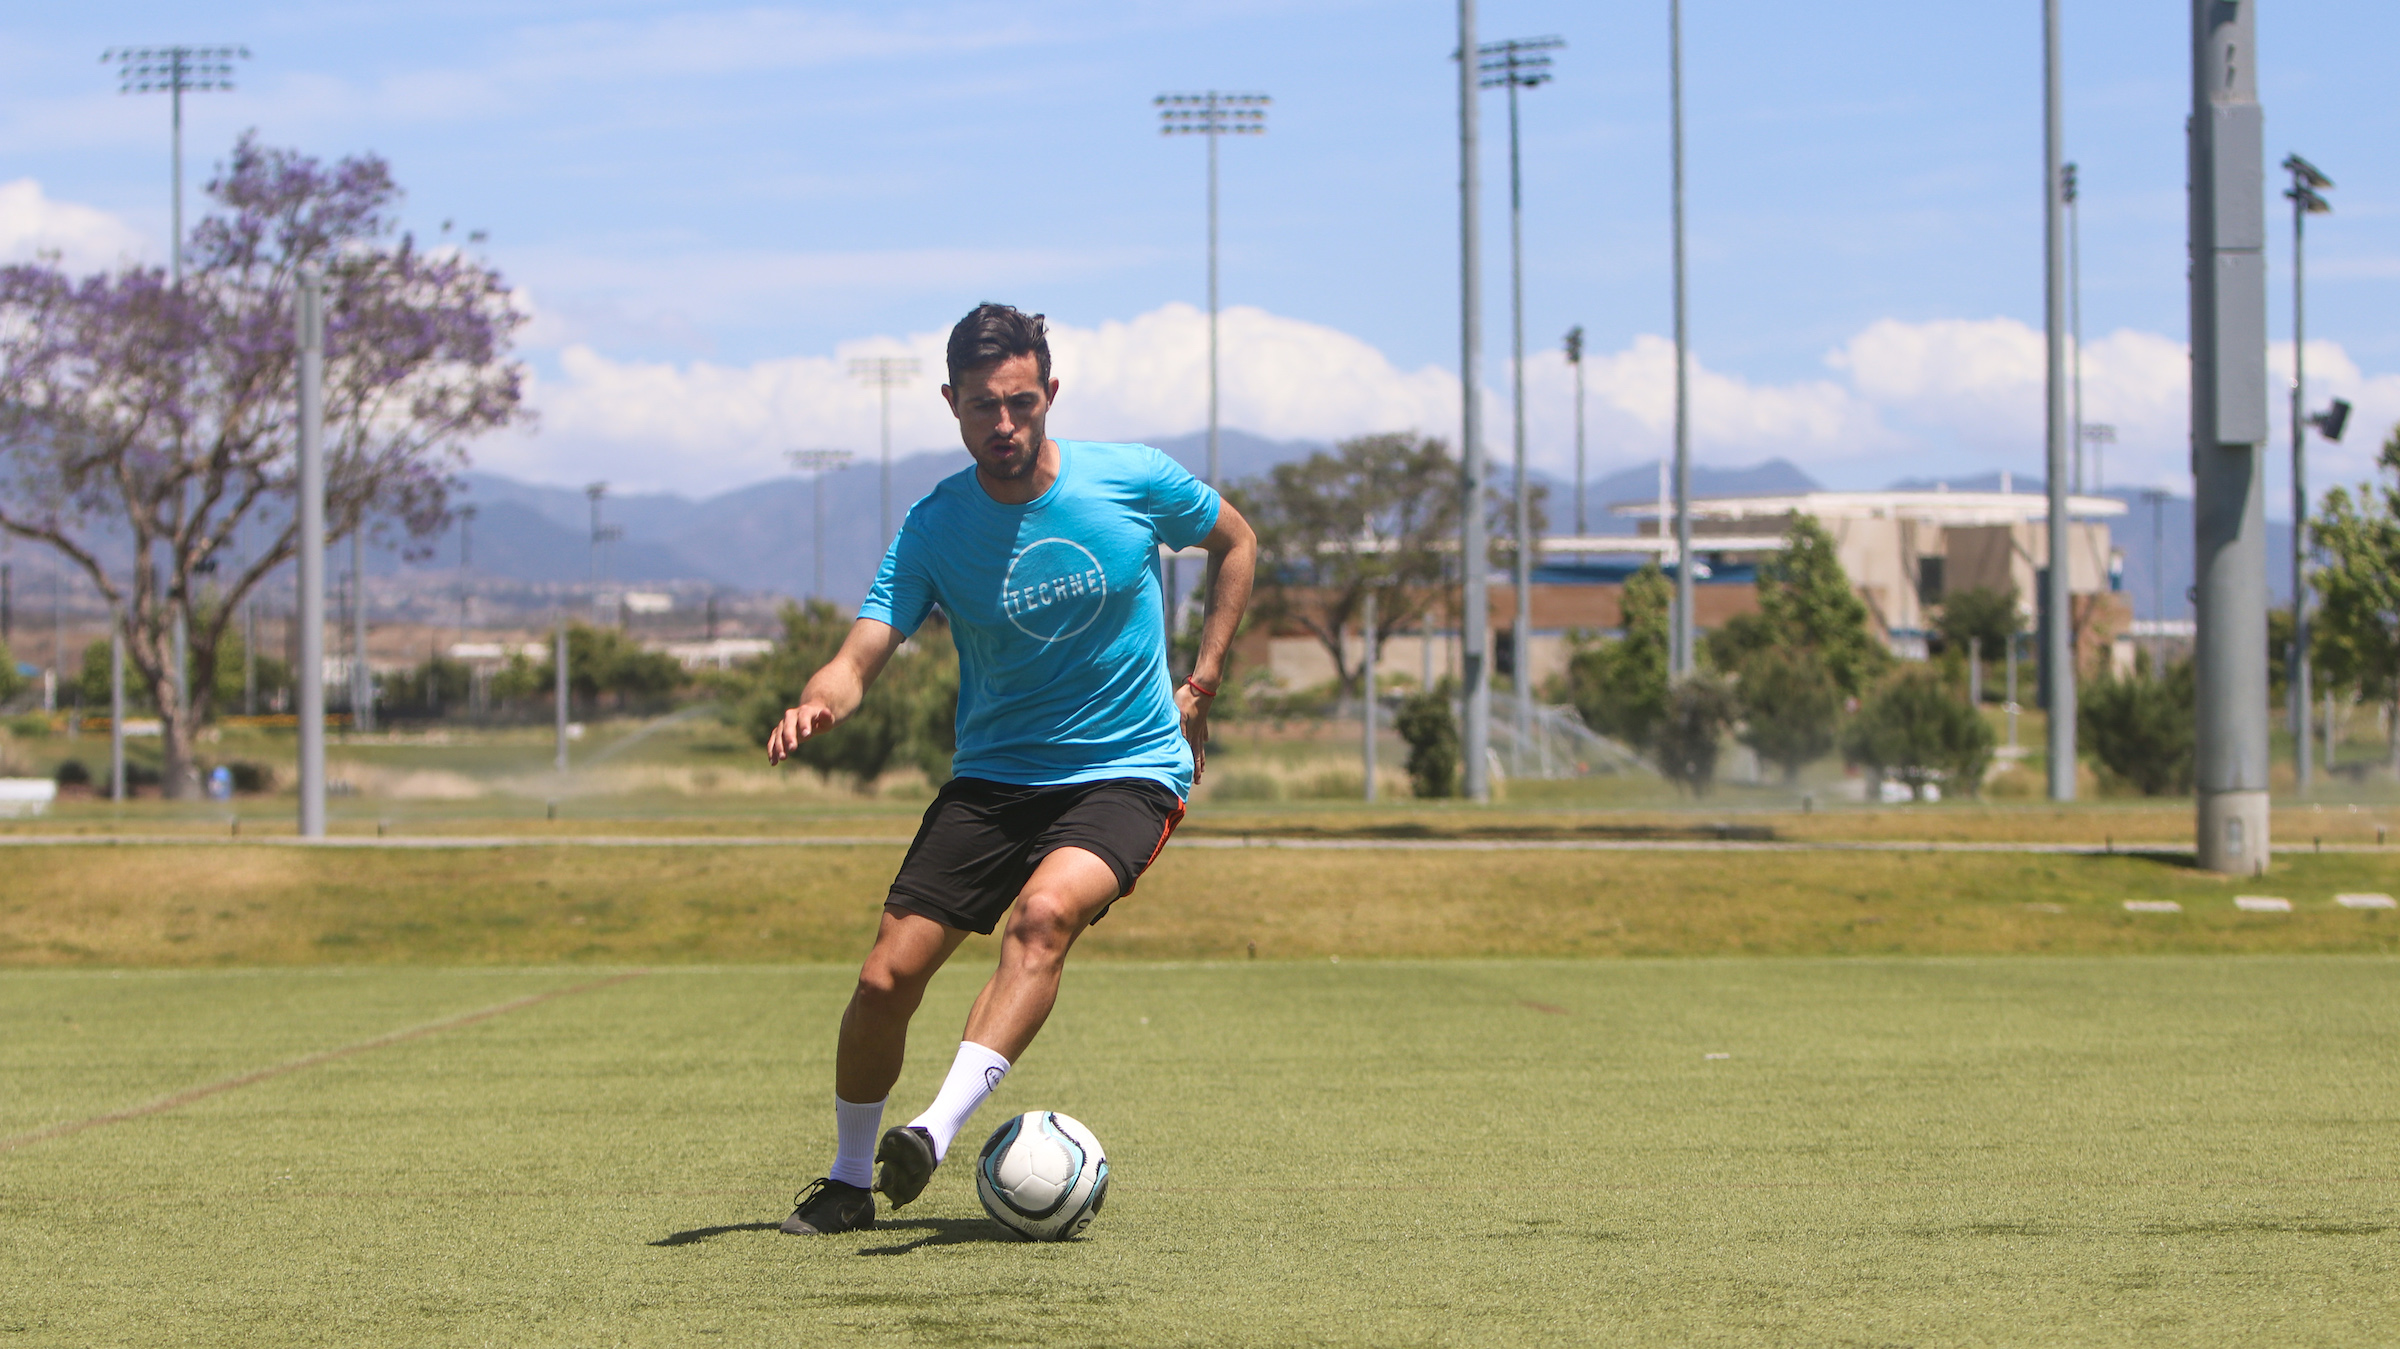 How to improve your ball control as a soccer player